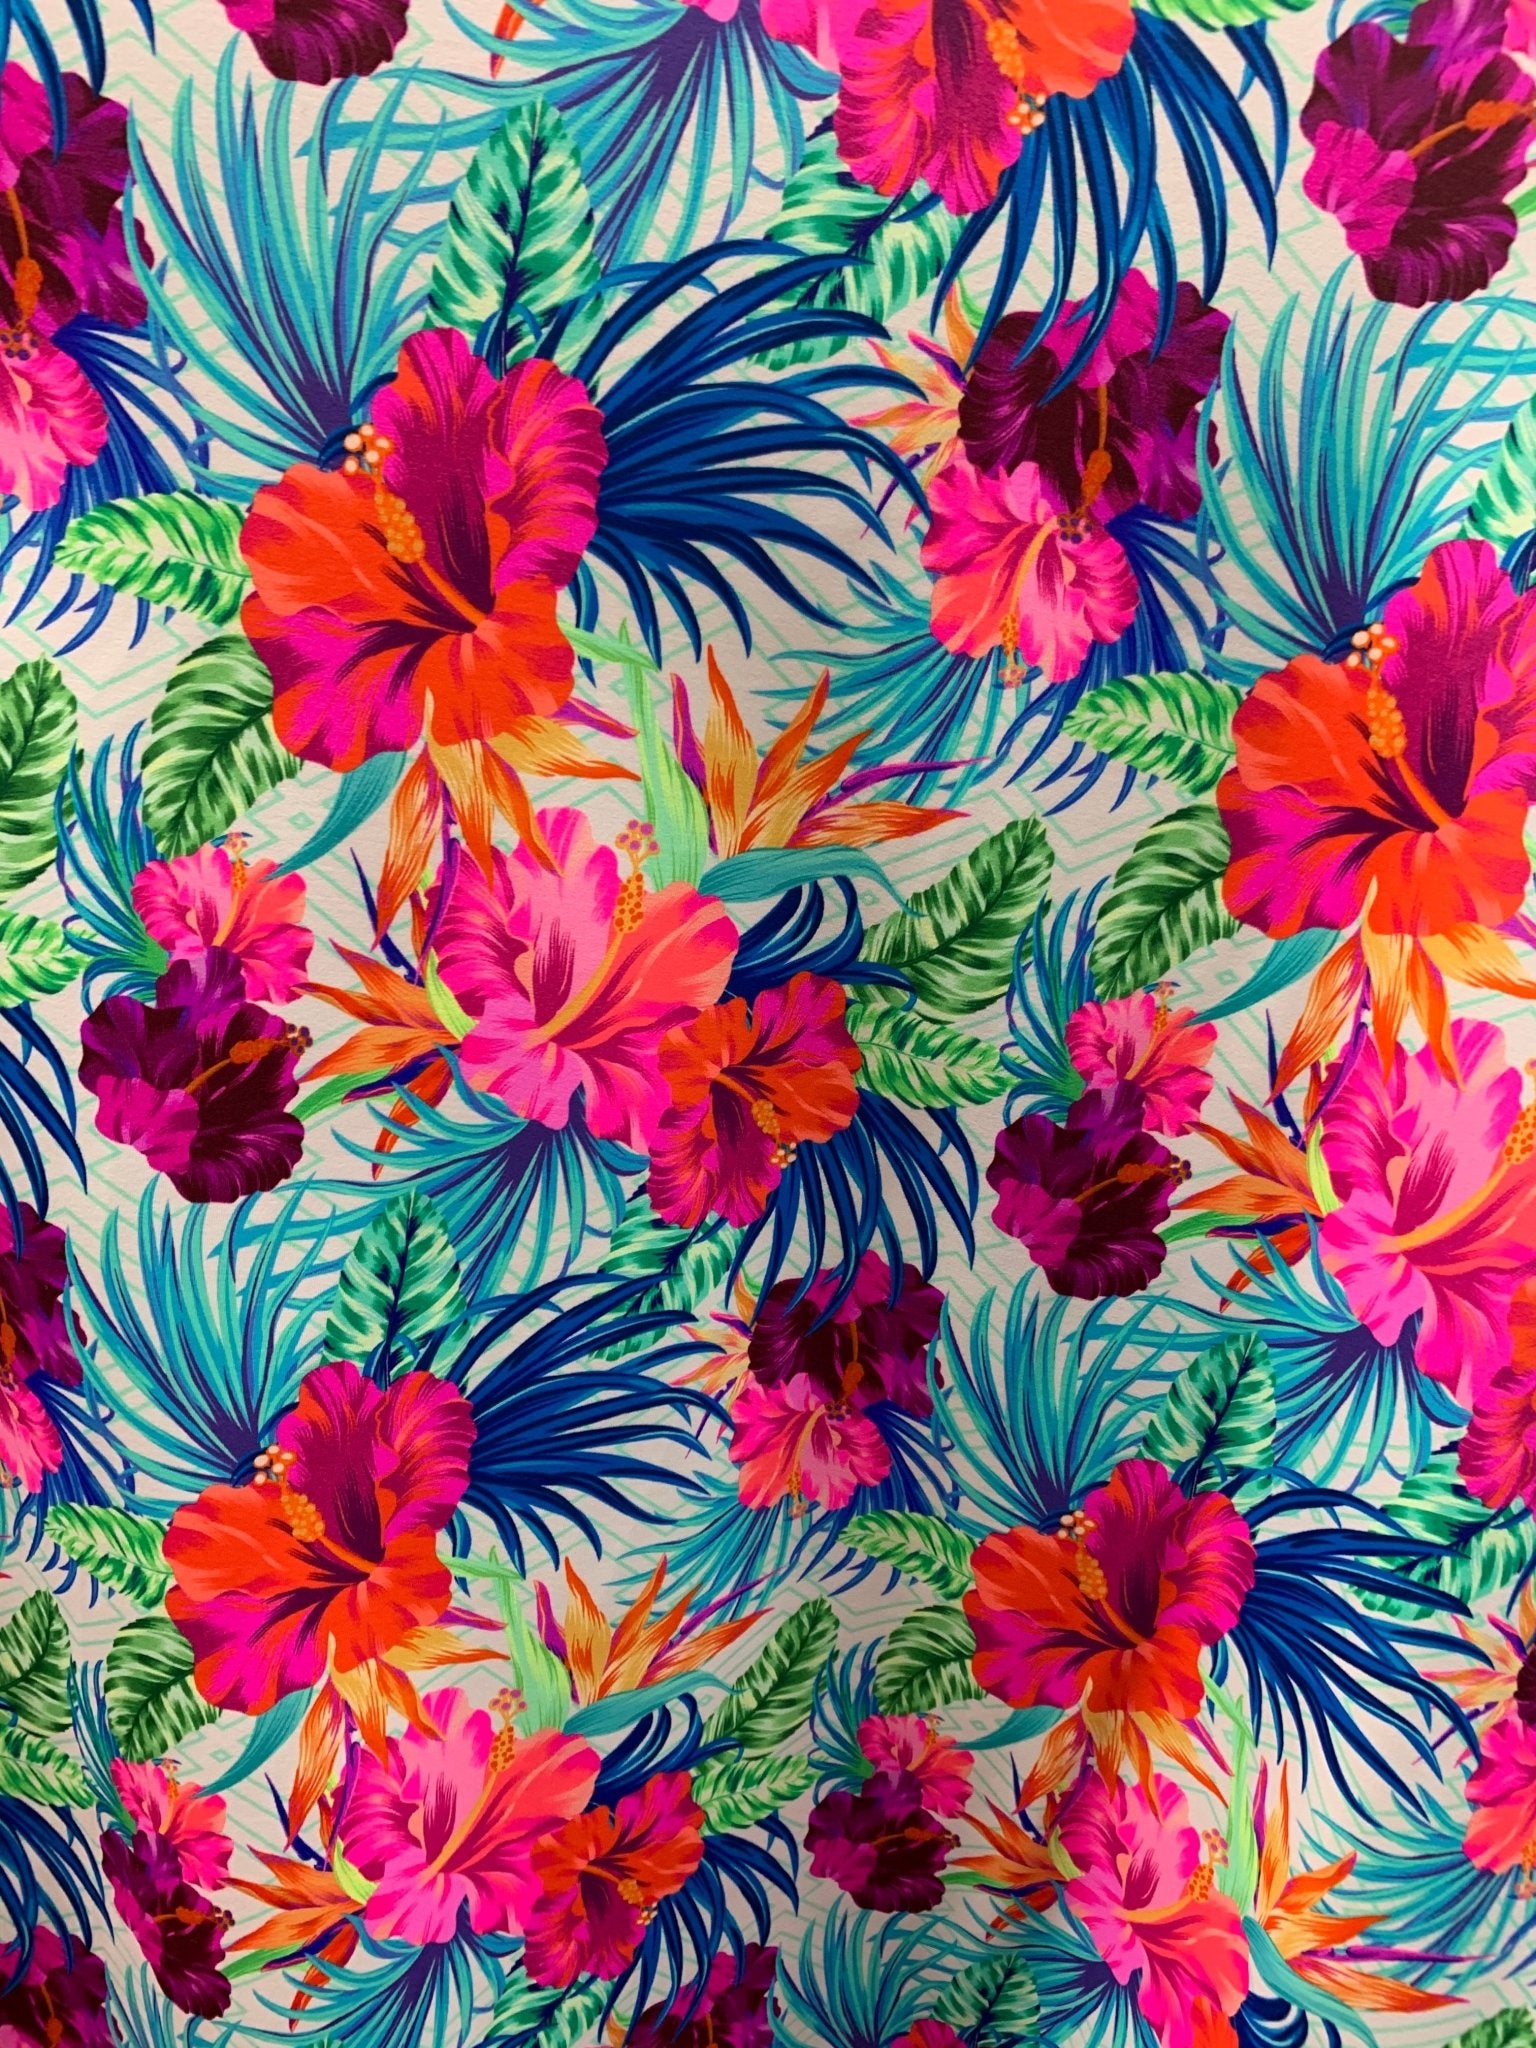 Hawaii Print Floral Nylon Spandex Swimsuit Fabric By The YardSpandex FabricICEFABRICICE FABRICSHawaii Print Floral Nylon Spandex Swimsuit Fabric By The Yard ICEFABRIC